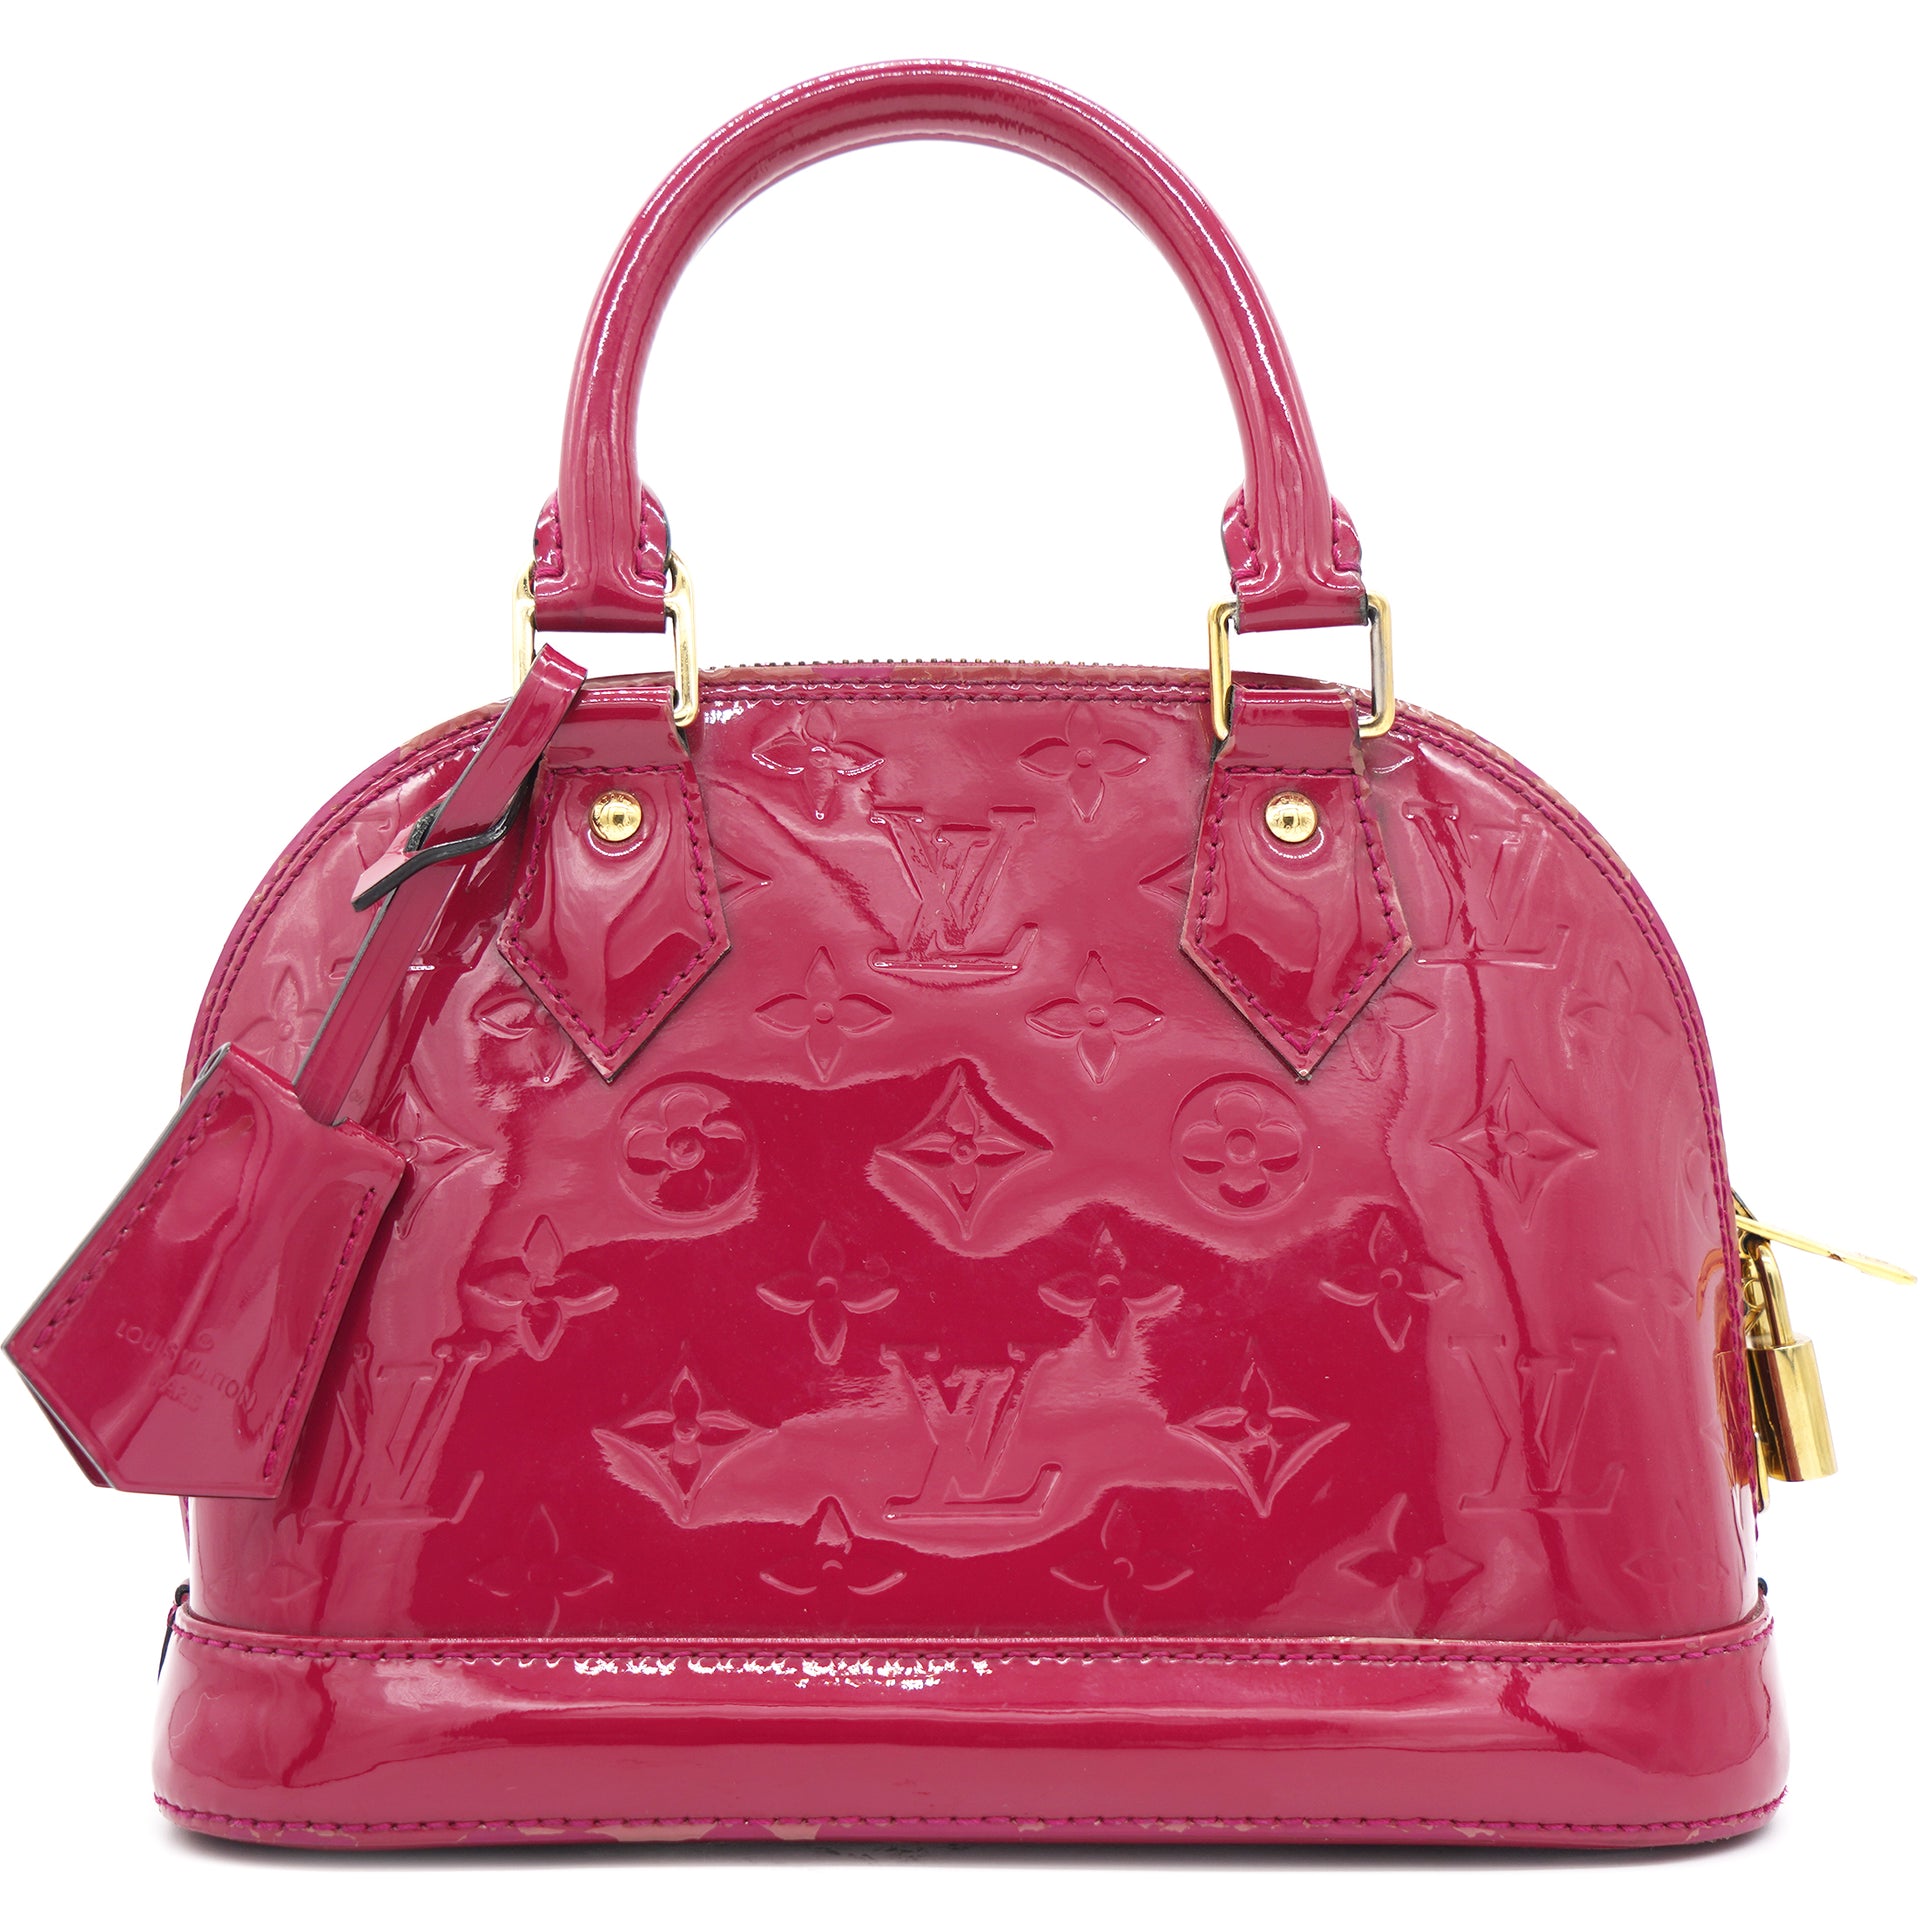 Brand New 2014 Louis Vuitton Alma MM in Vernis Leather Indian Rose